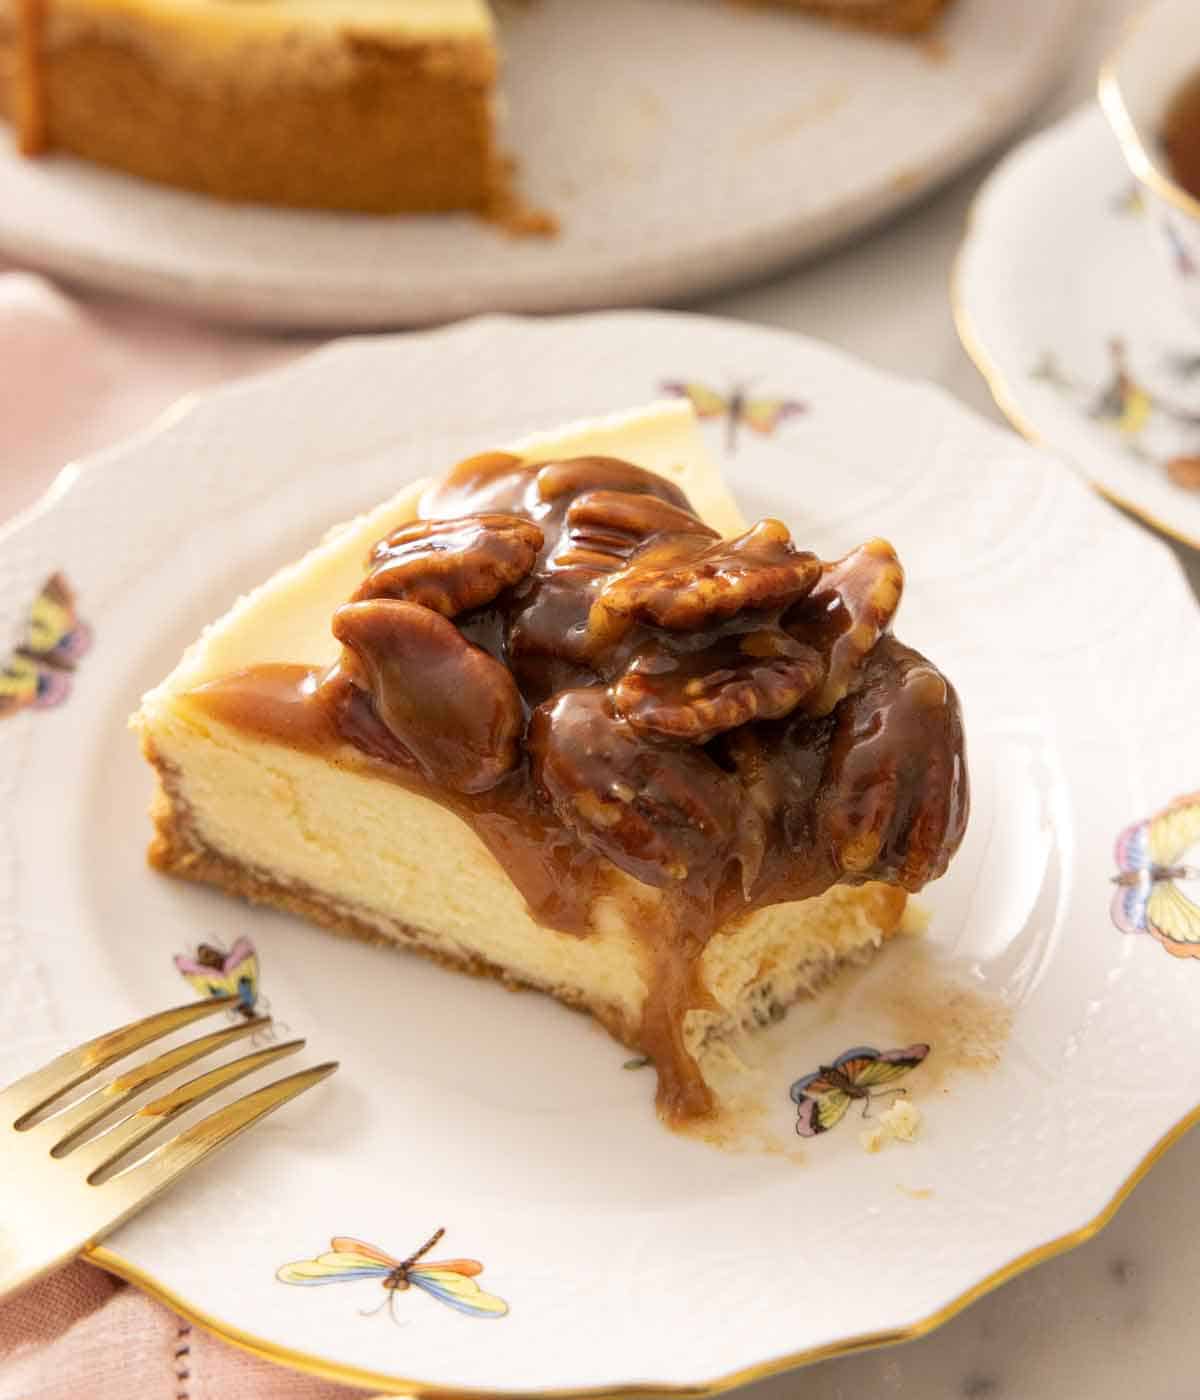 A slice of pecan pie cheesecake on a plate with a bite taken out.